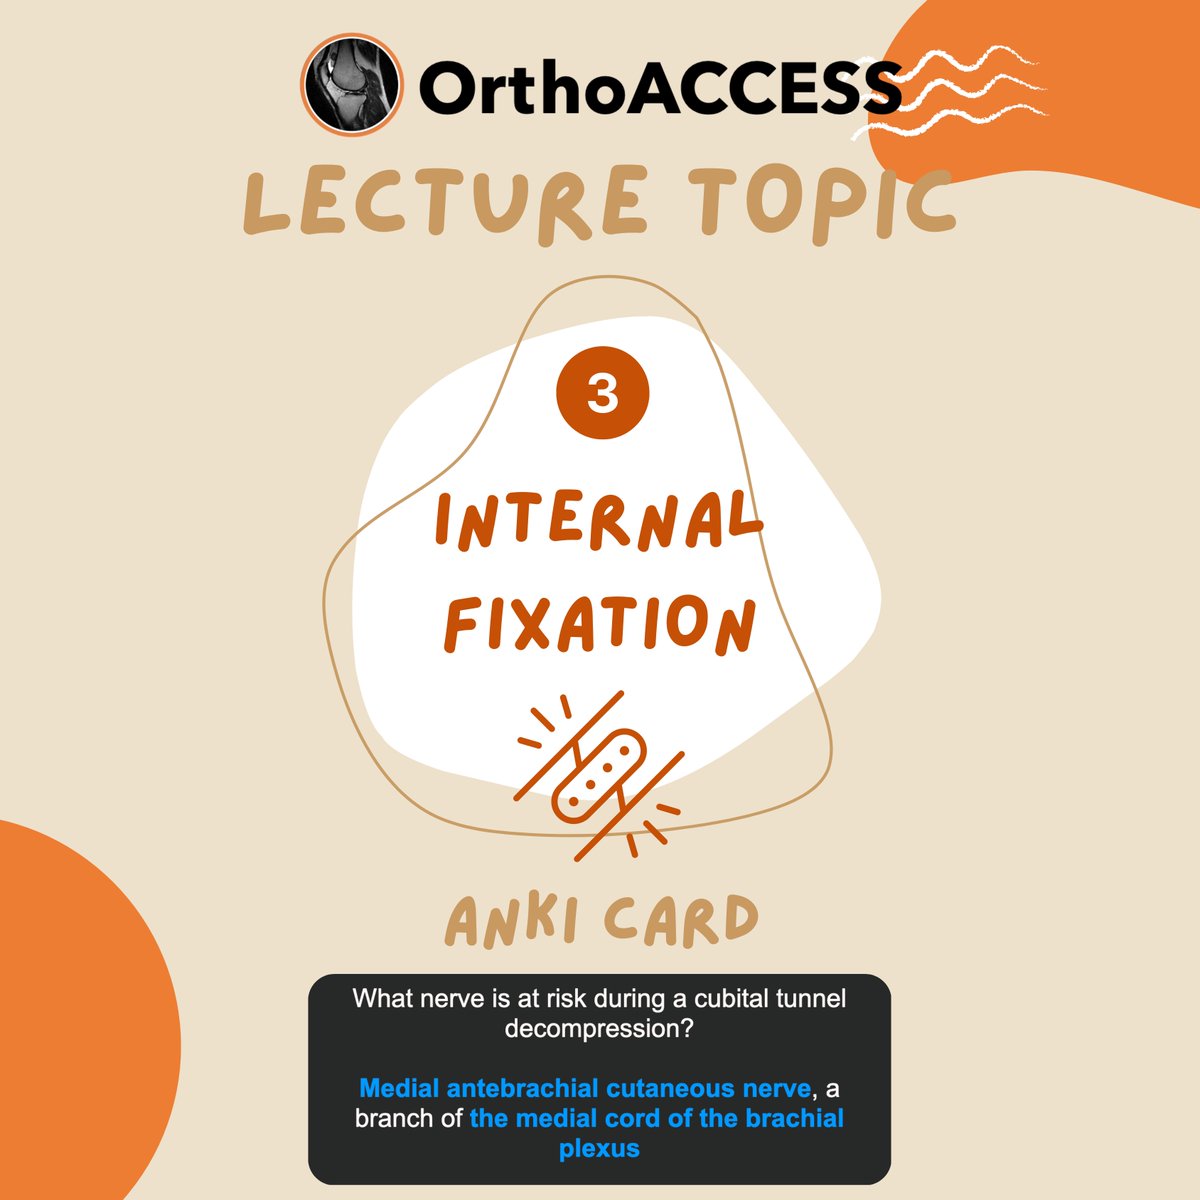 Welcome to Week 3: Internal Fixation! Check our website (link in bio) for access to the lecture slides, recording, and other resources.